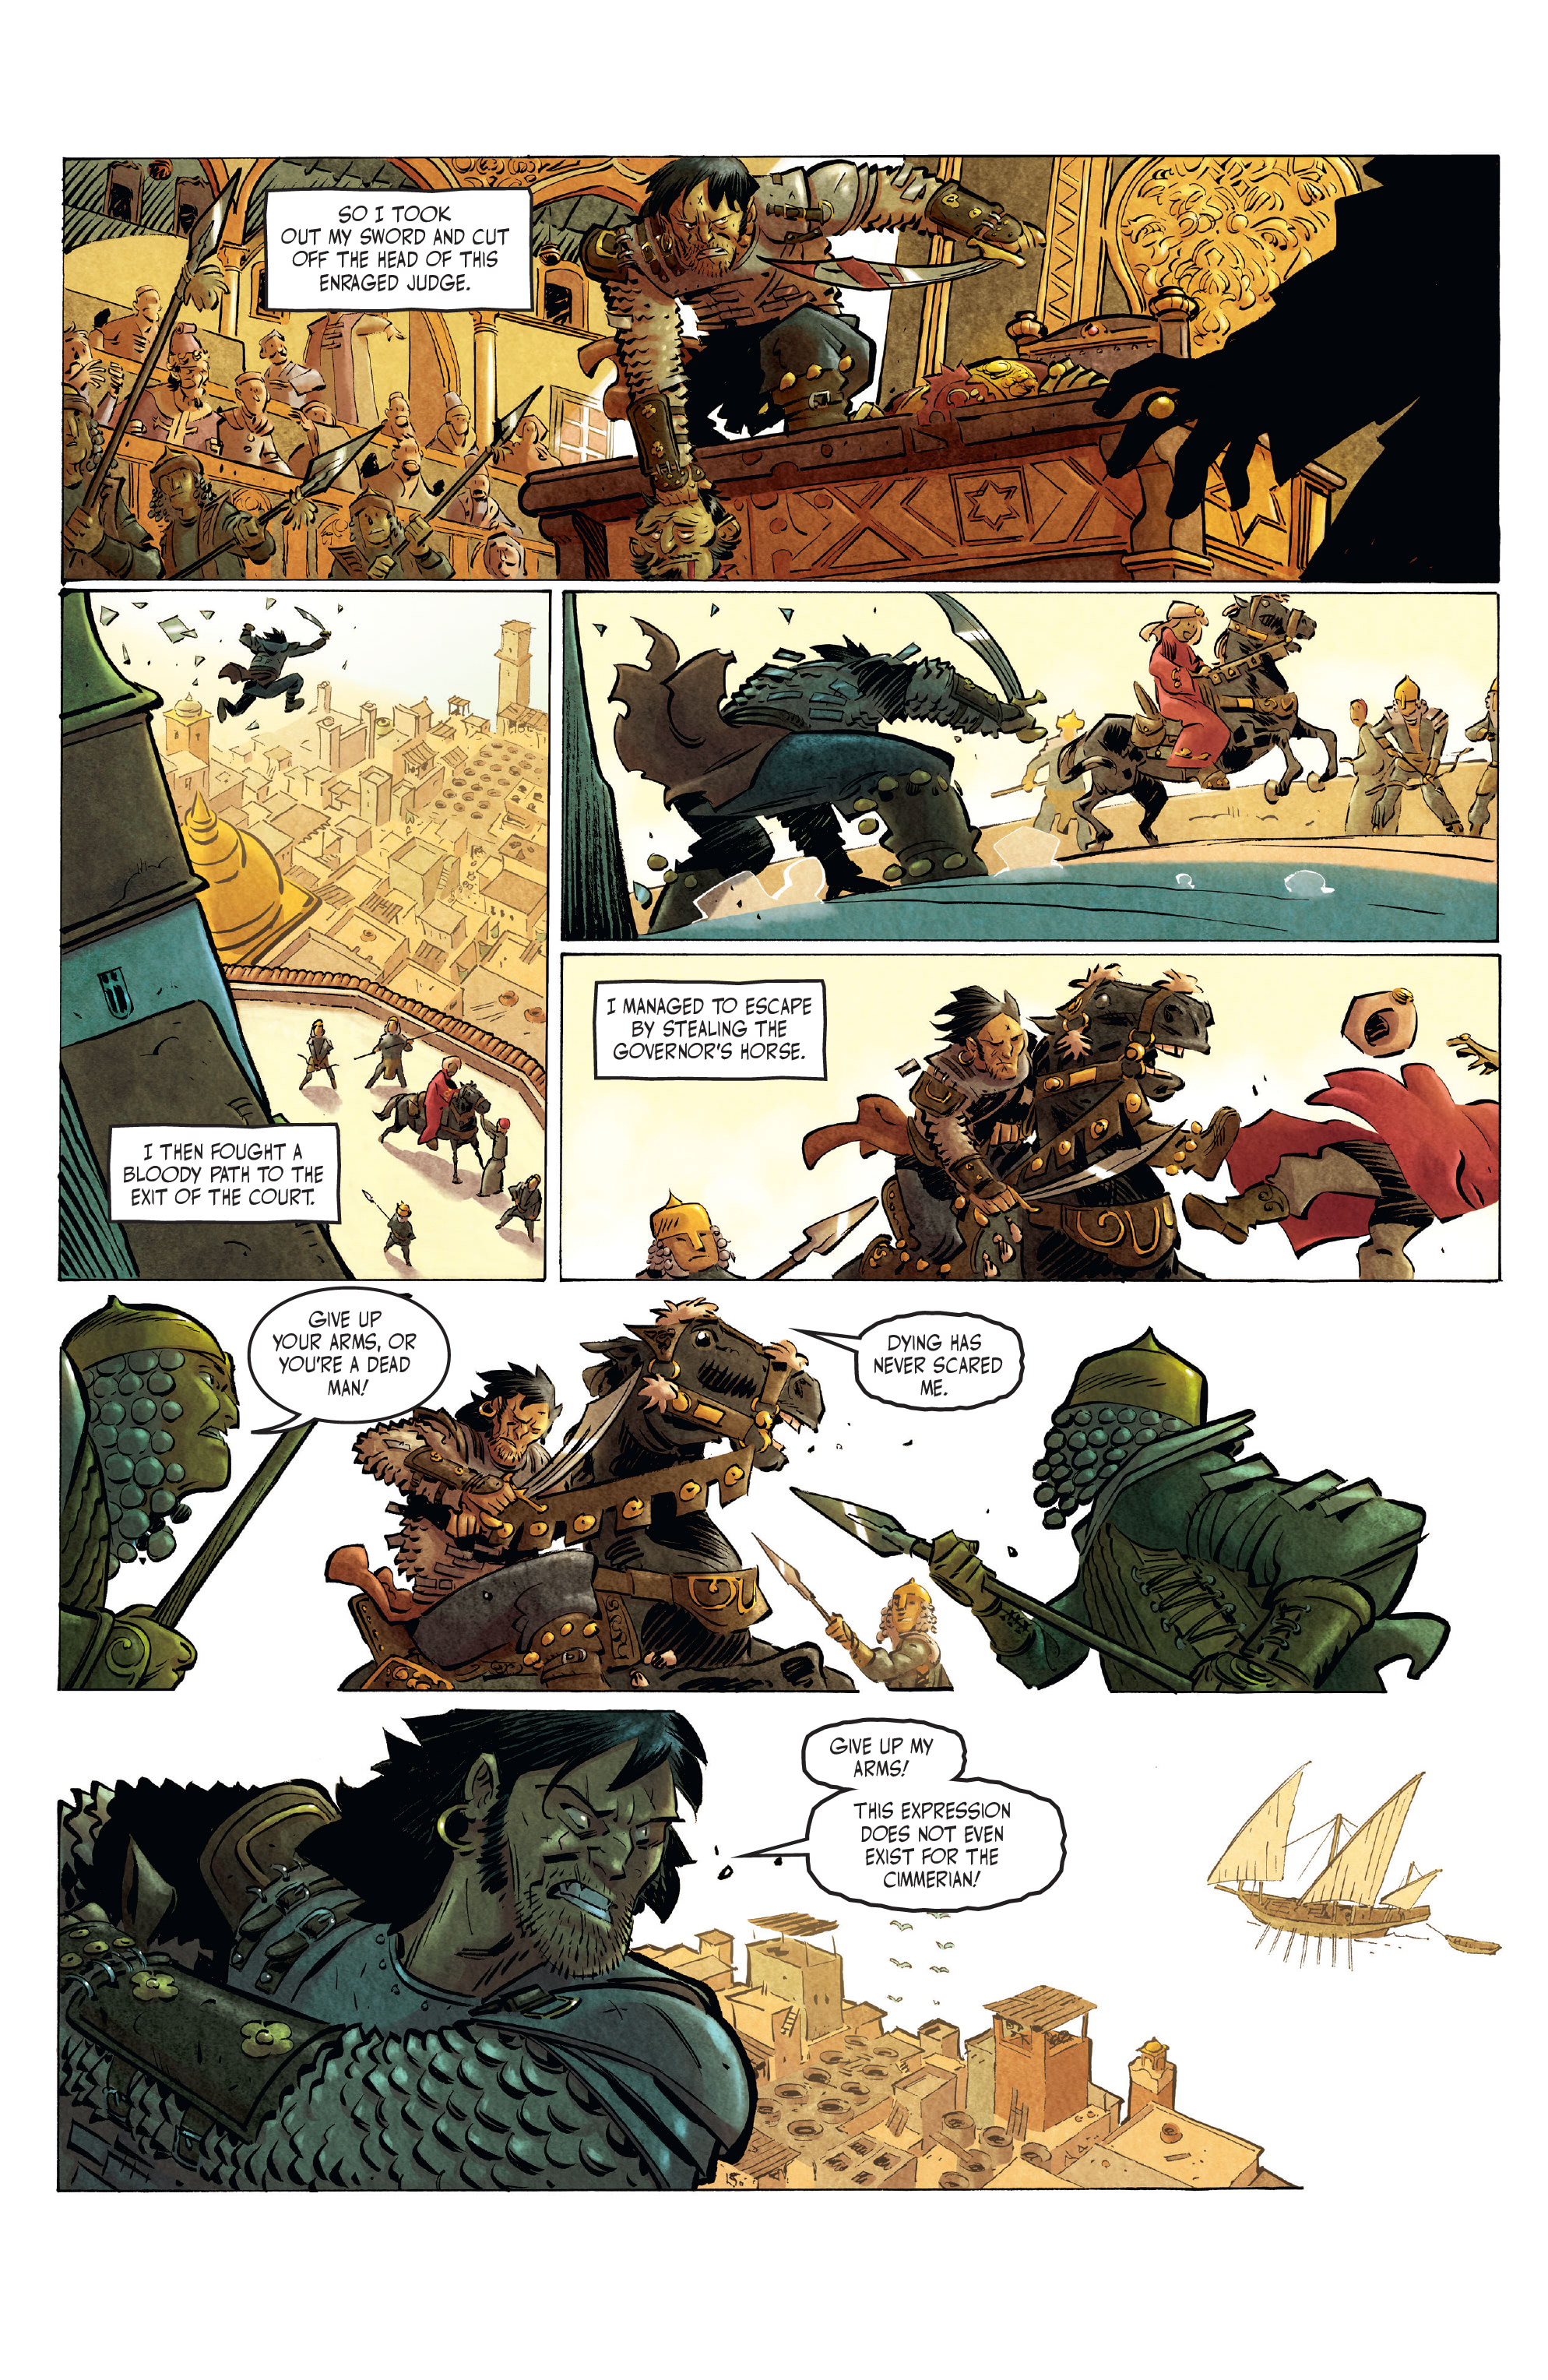 The Cimmerian: Queen of the Black Coast (2020-): Chapter 1 - Page 4